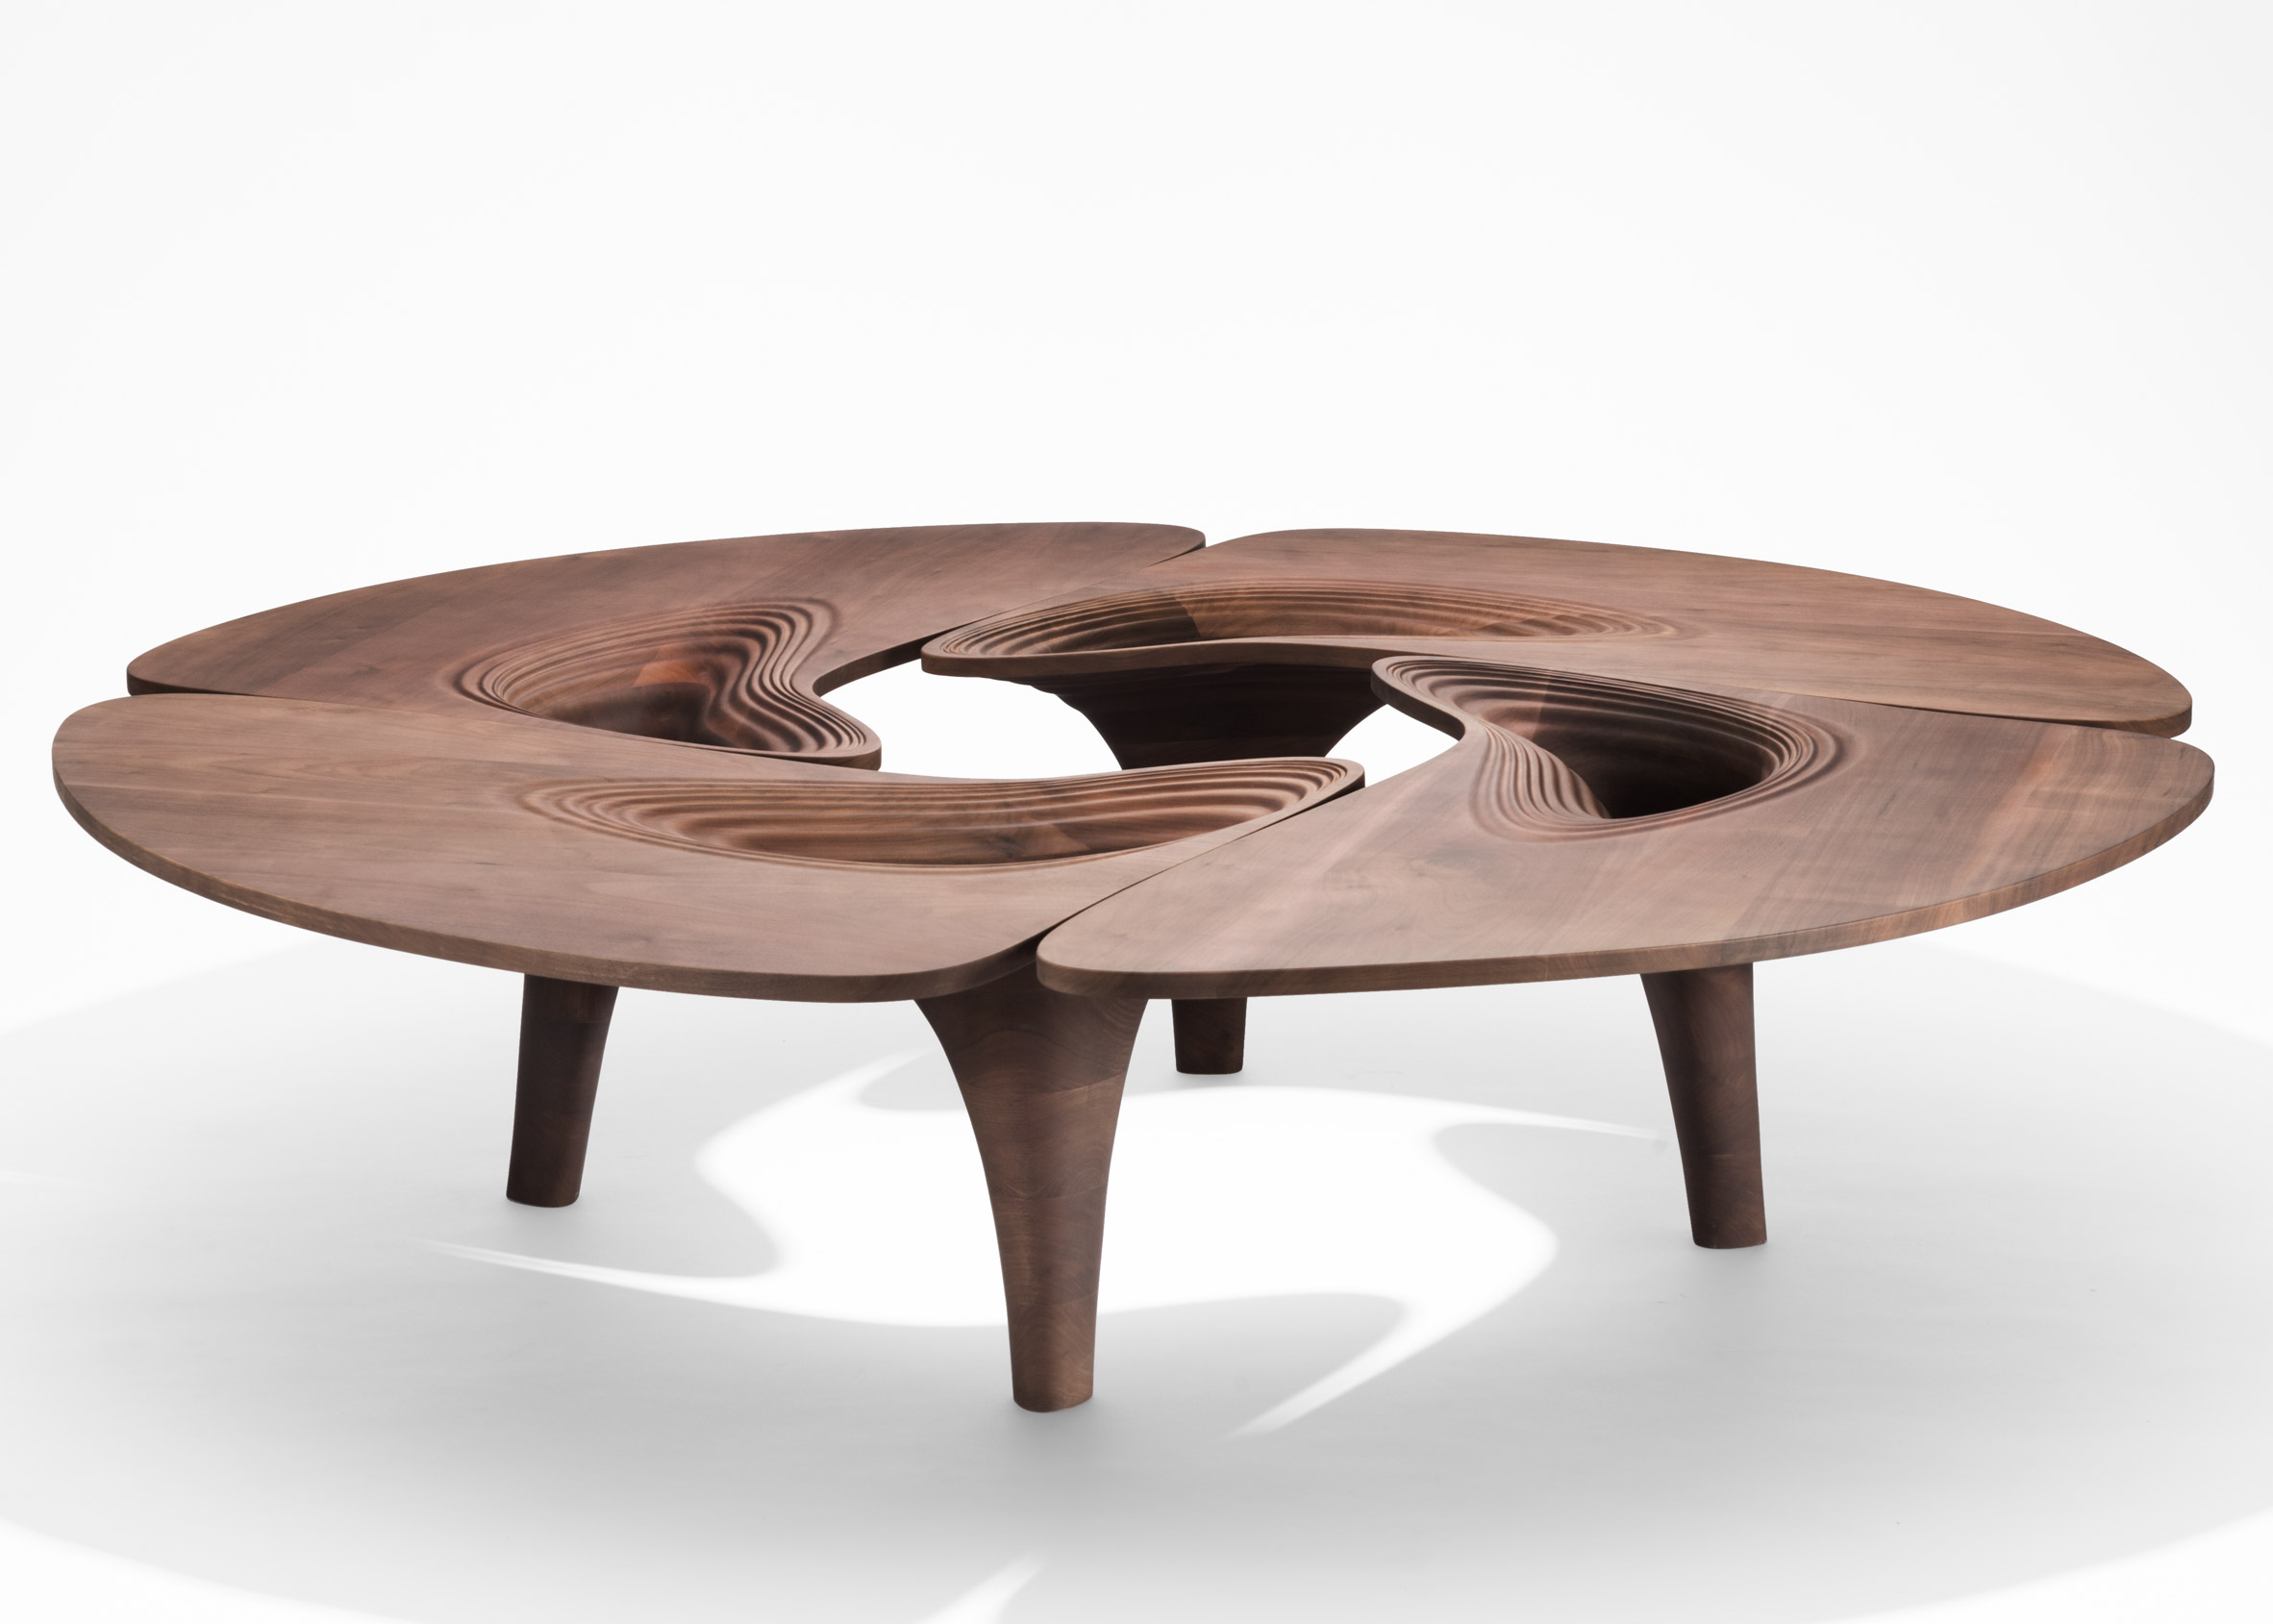 Zaha Hadid S Final Collection For David Gill Based On Mid Century Furniture